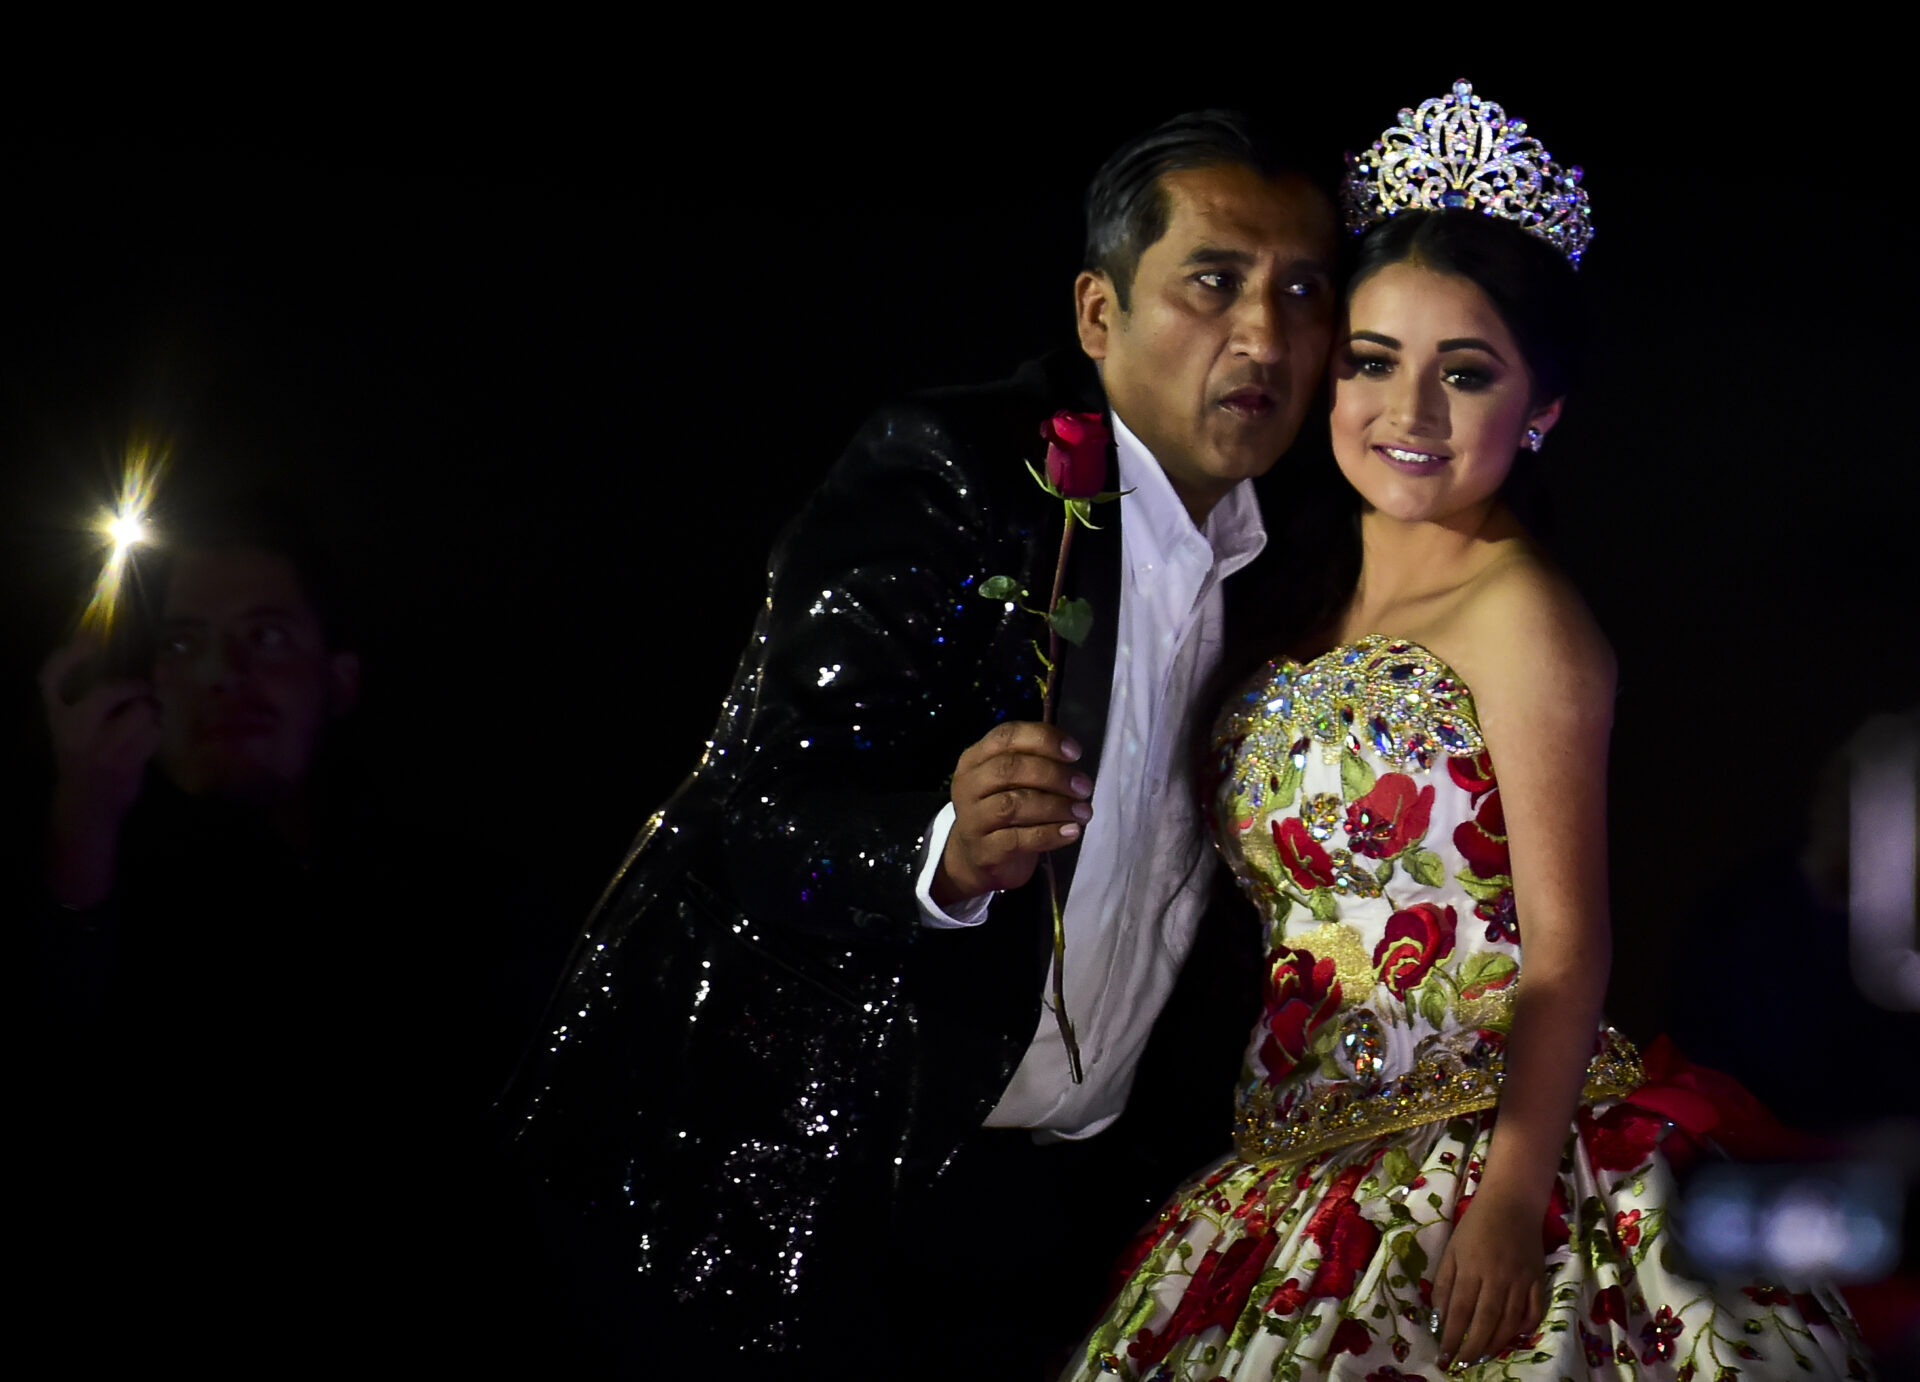 Rubi Ibarra poses during her 15th birthday celebrations in Villa Guadalupe, San Luis Potosi State, on December 26, 2016.  Rubi, a small-town Mexican teen, welcomed thousands of guests for her 15th birthday party  after her parents' video invitation to the milestone event went viral online.  / AFP PHOTO / RONALDO SCHEMIDT